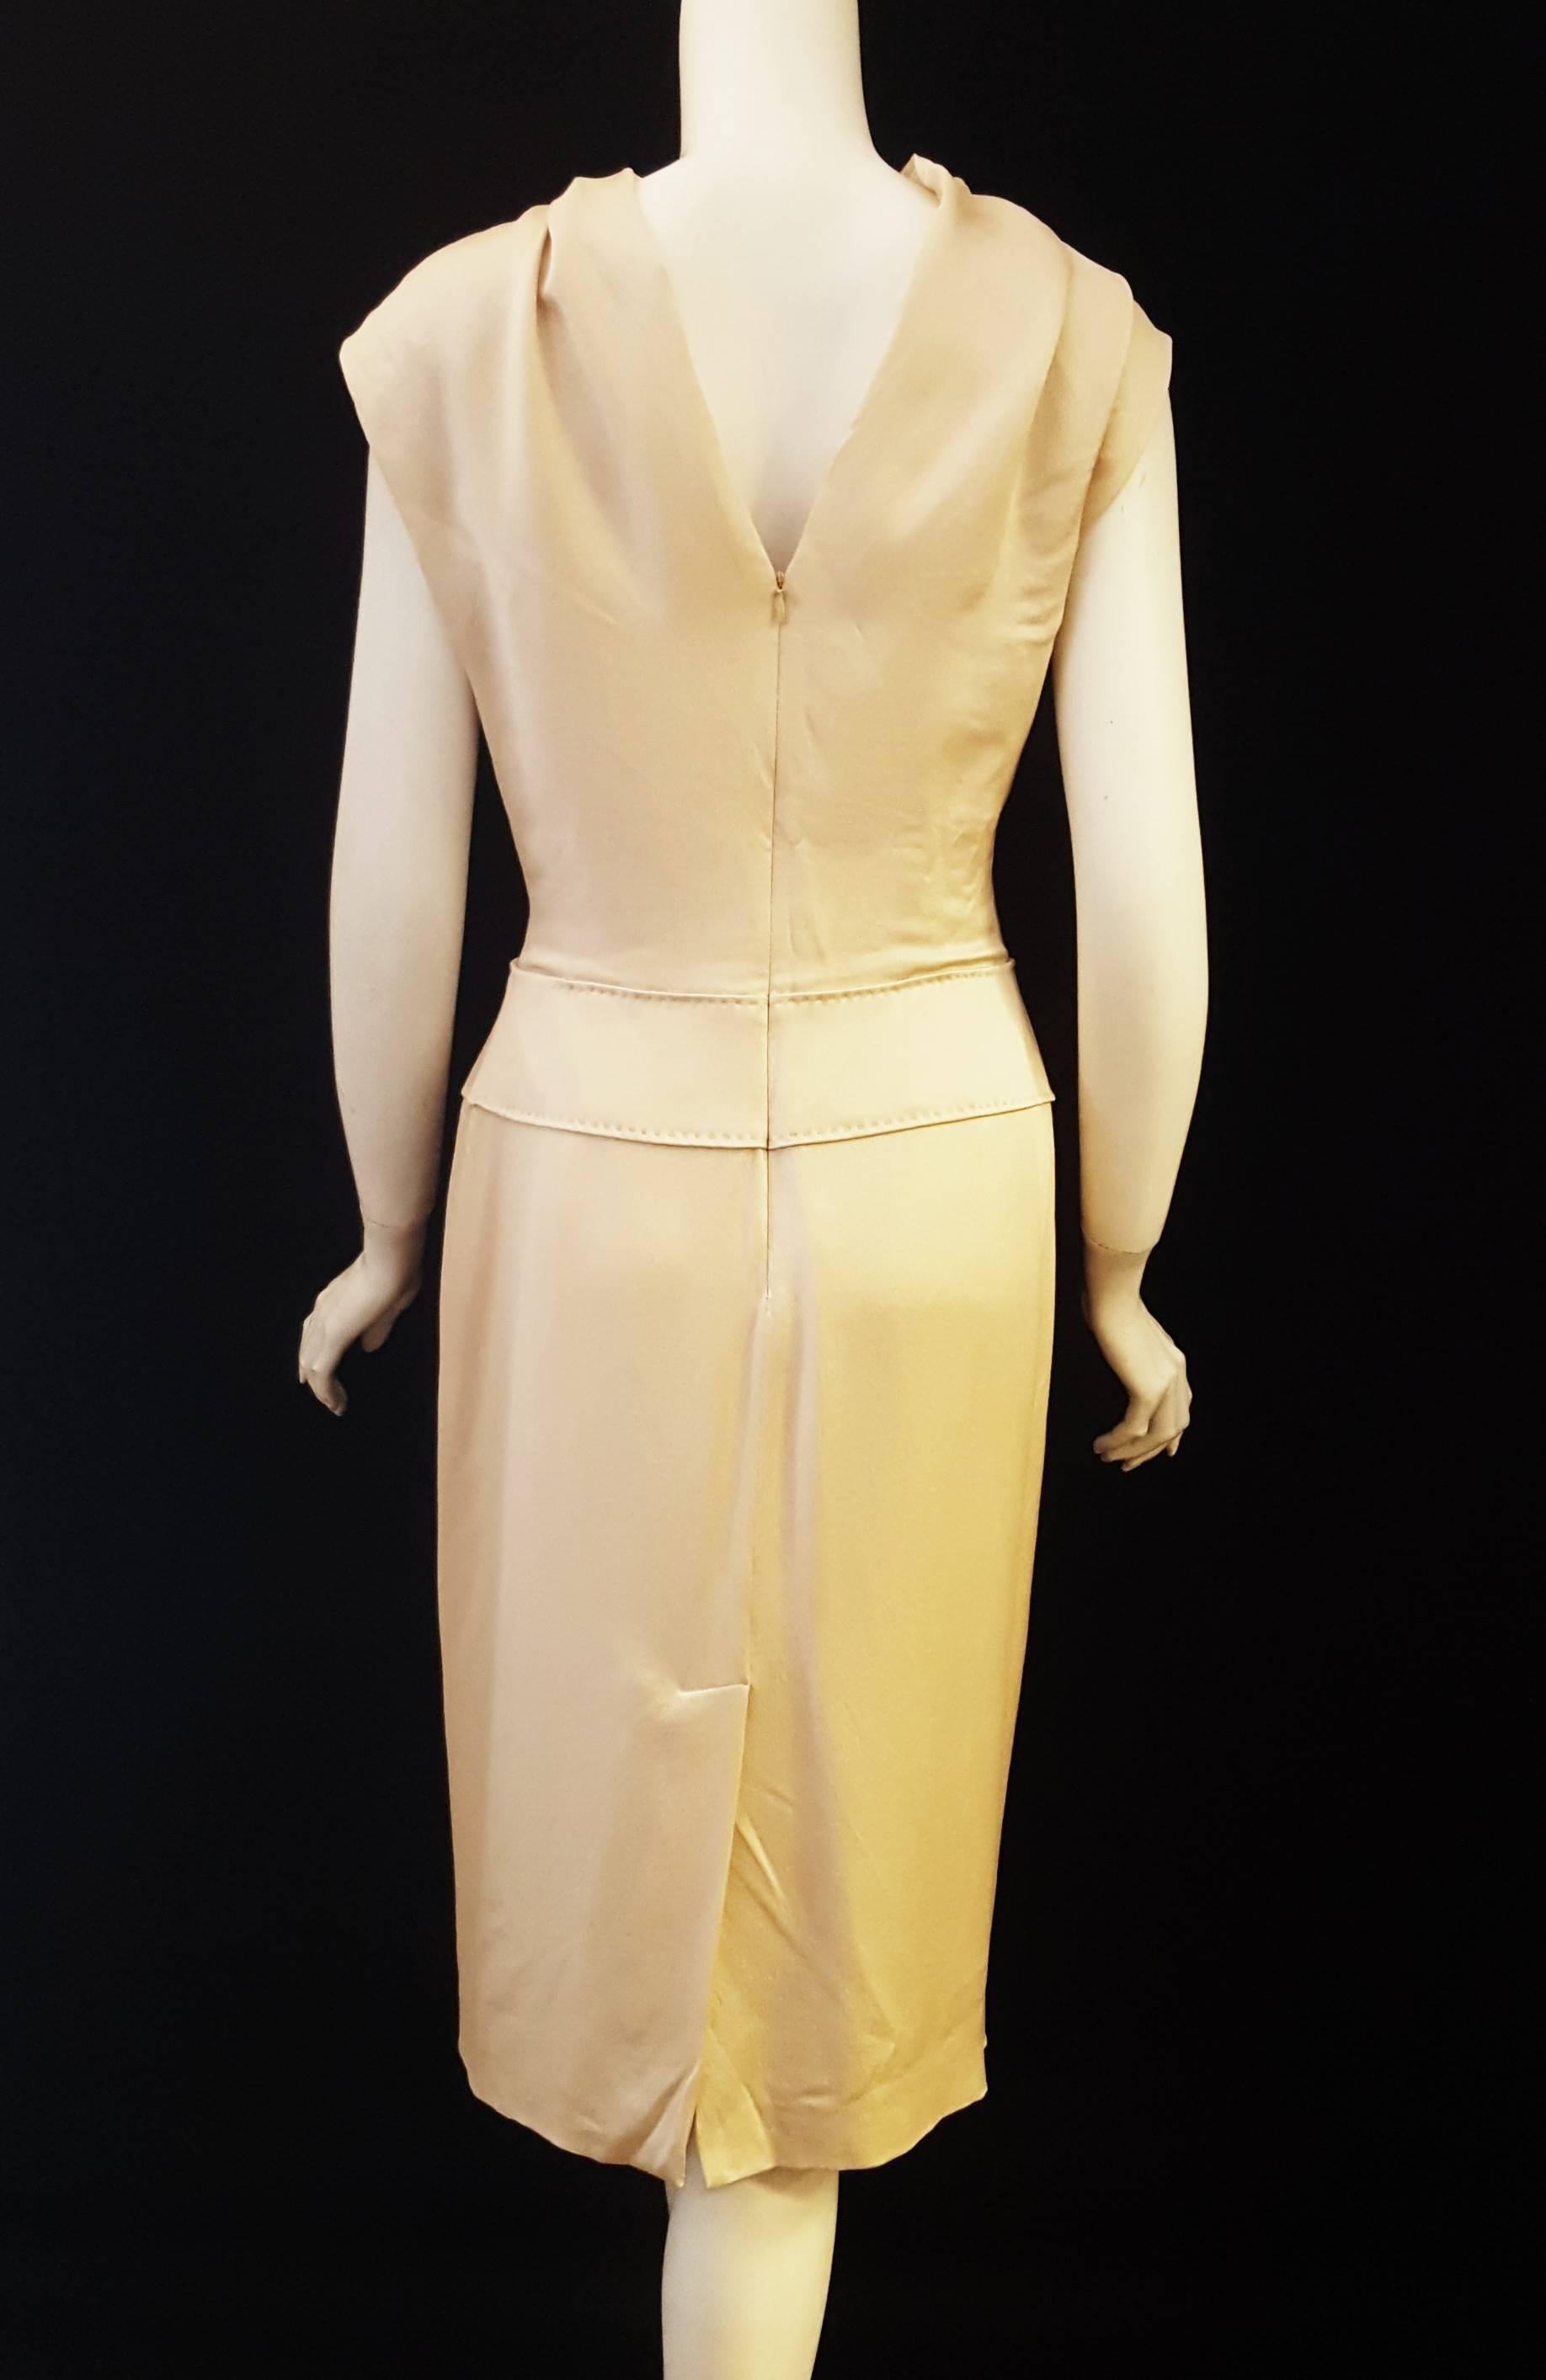 Stunning Alexander McQueen beige hammered silk dress features a partially exposed V back that terminates at the hidden zipper.  This interesting sleeveless dress with slight cowl neck is elegant and very current, the perfect all year long dress.  